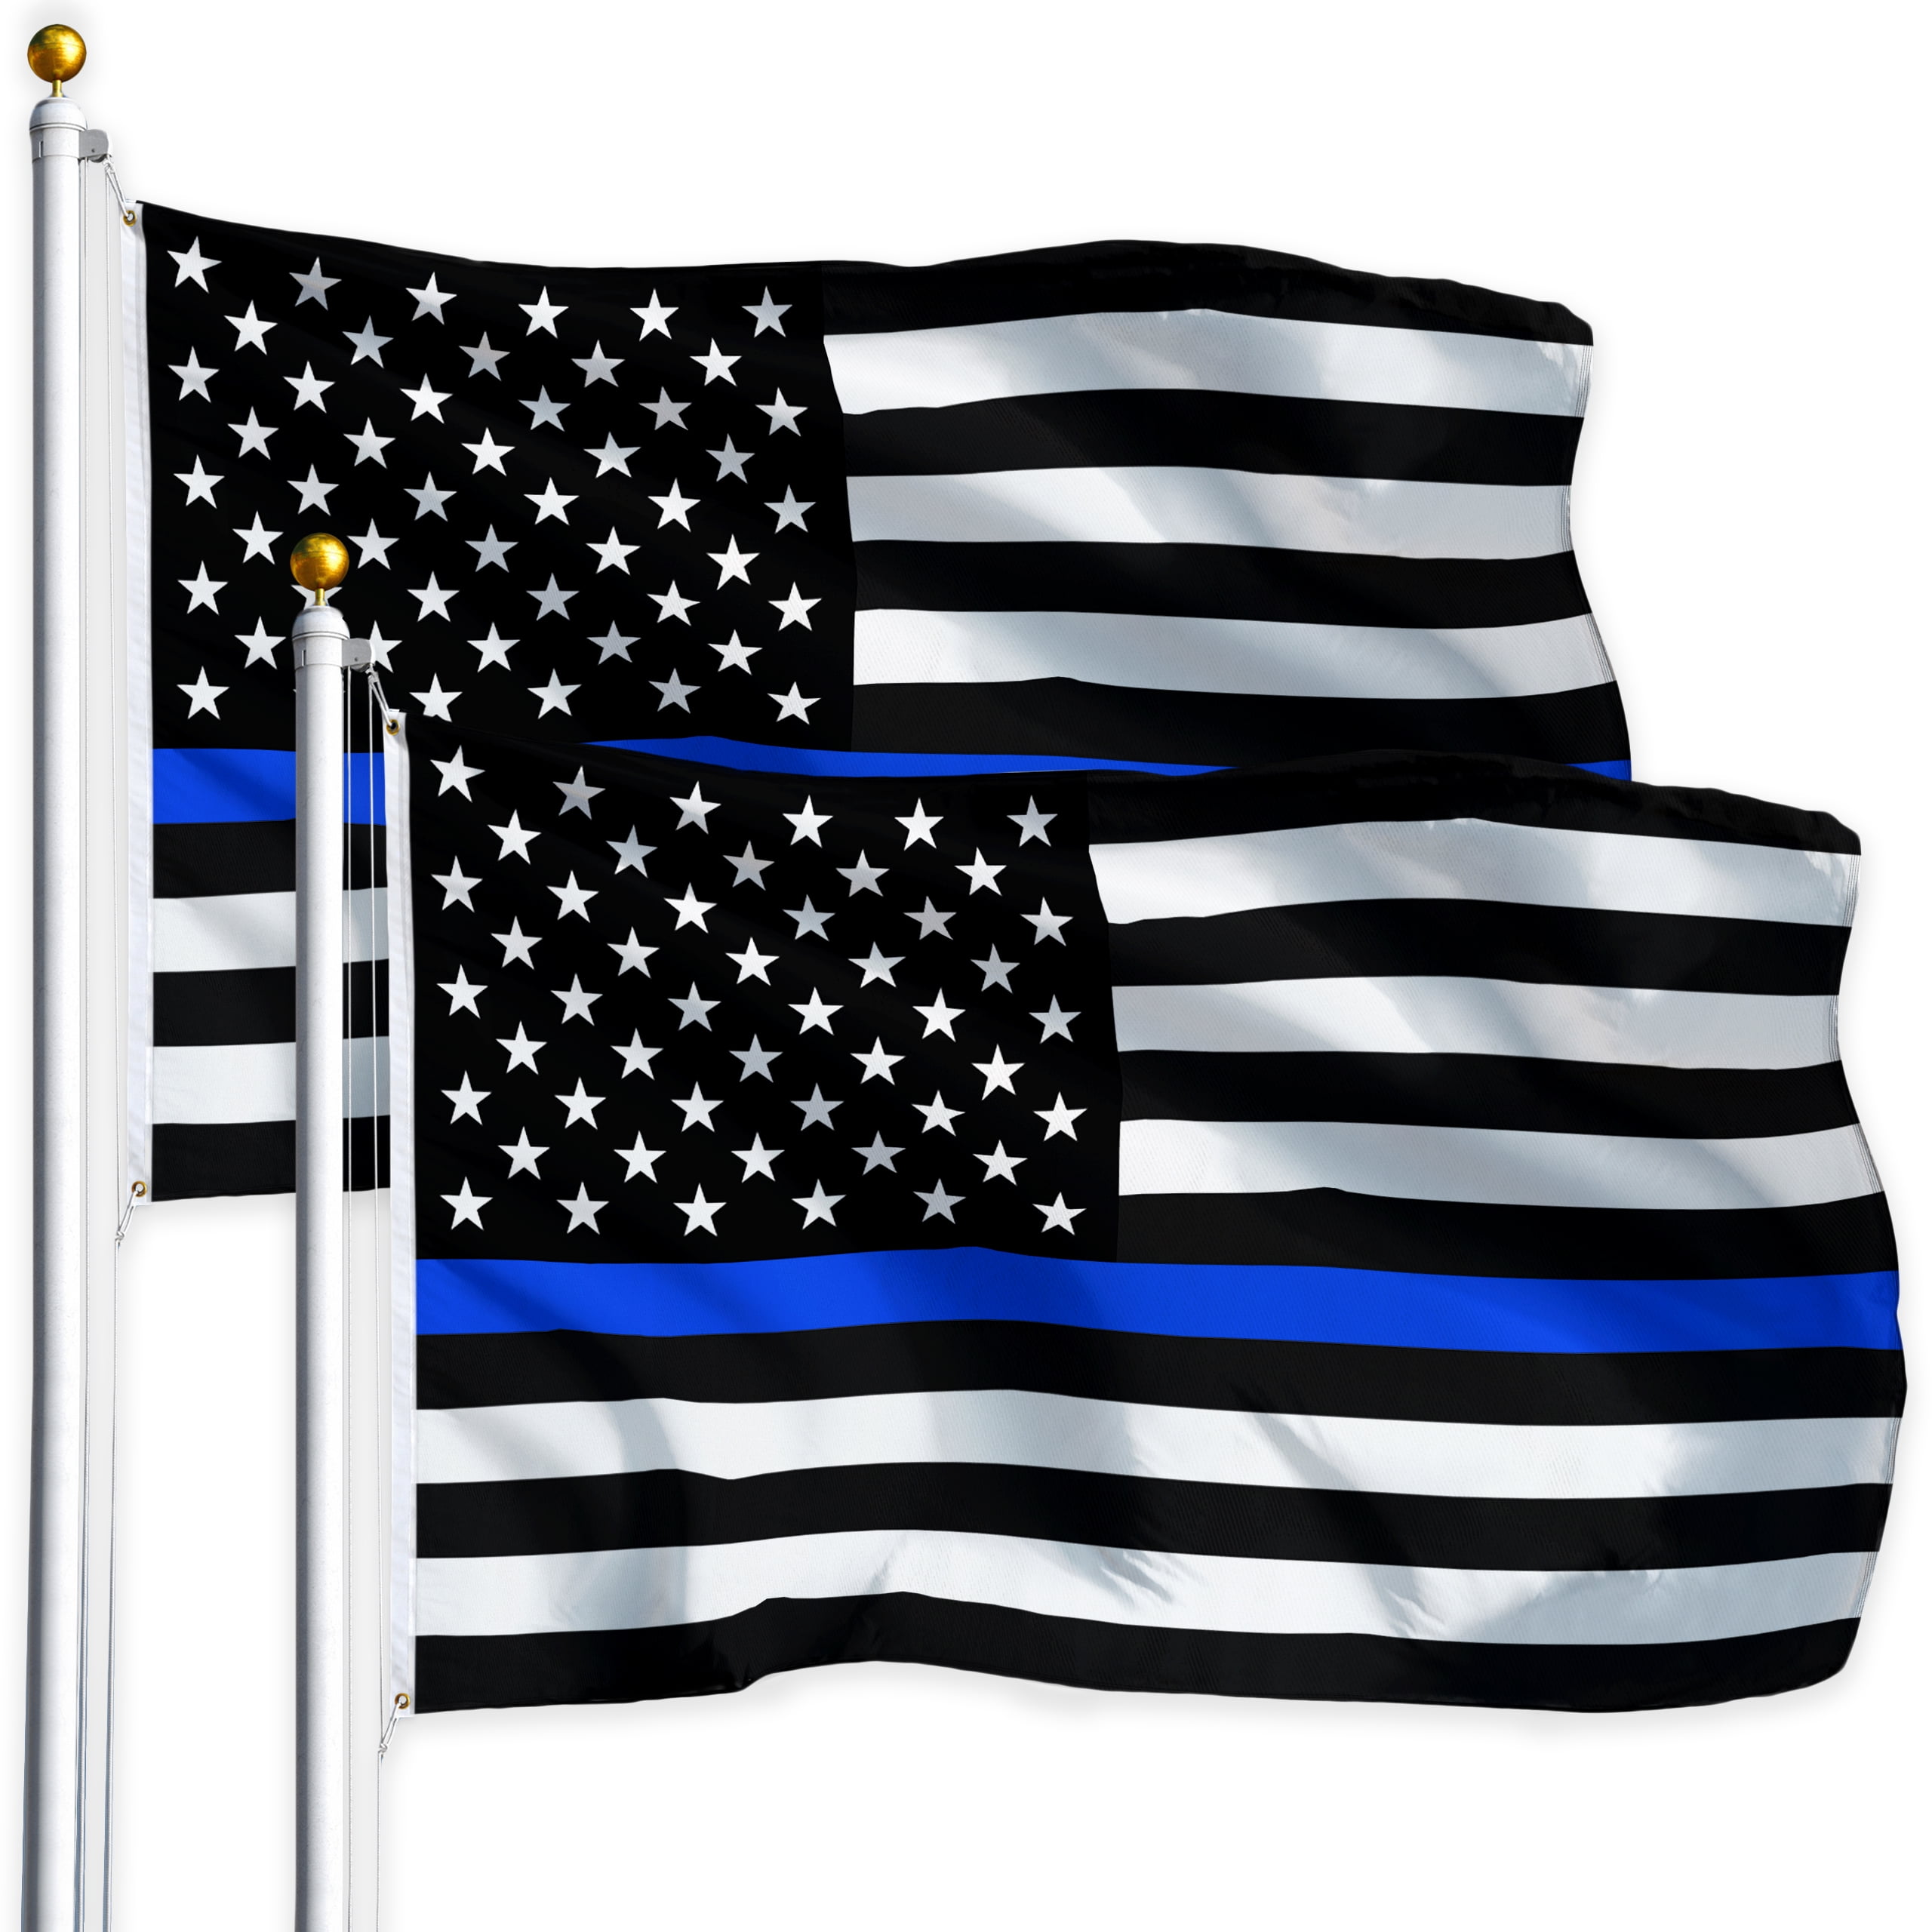 2Pcs 3x5 FT American police Flag Thin Blue Line Black & White Policemen Support 